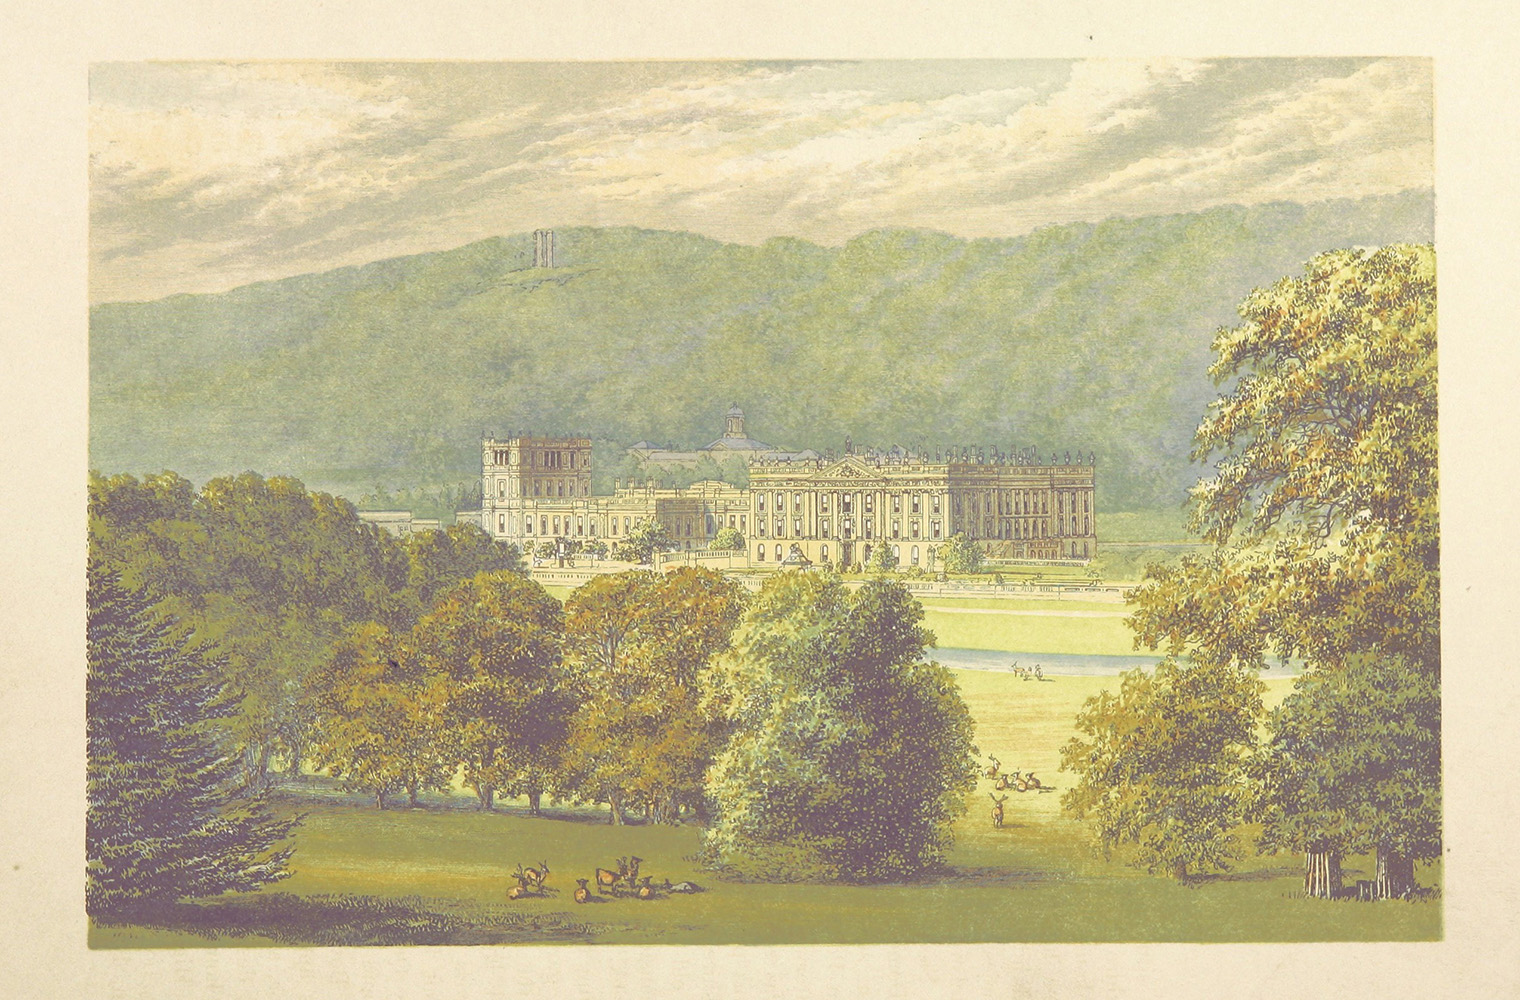 The great house of Chatsworth